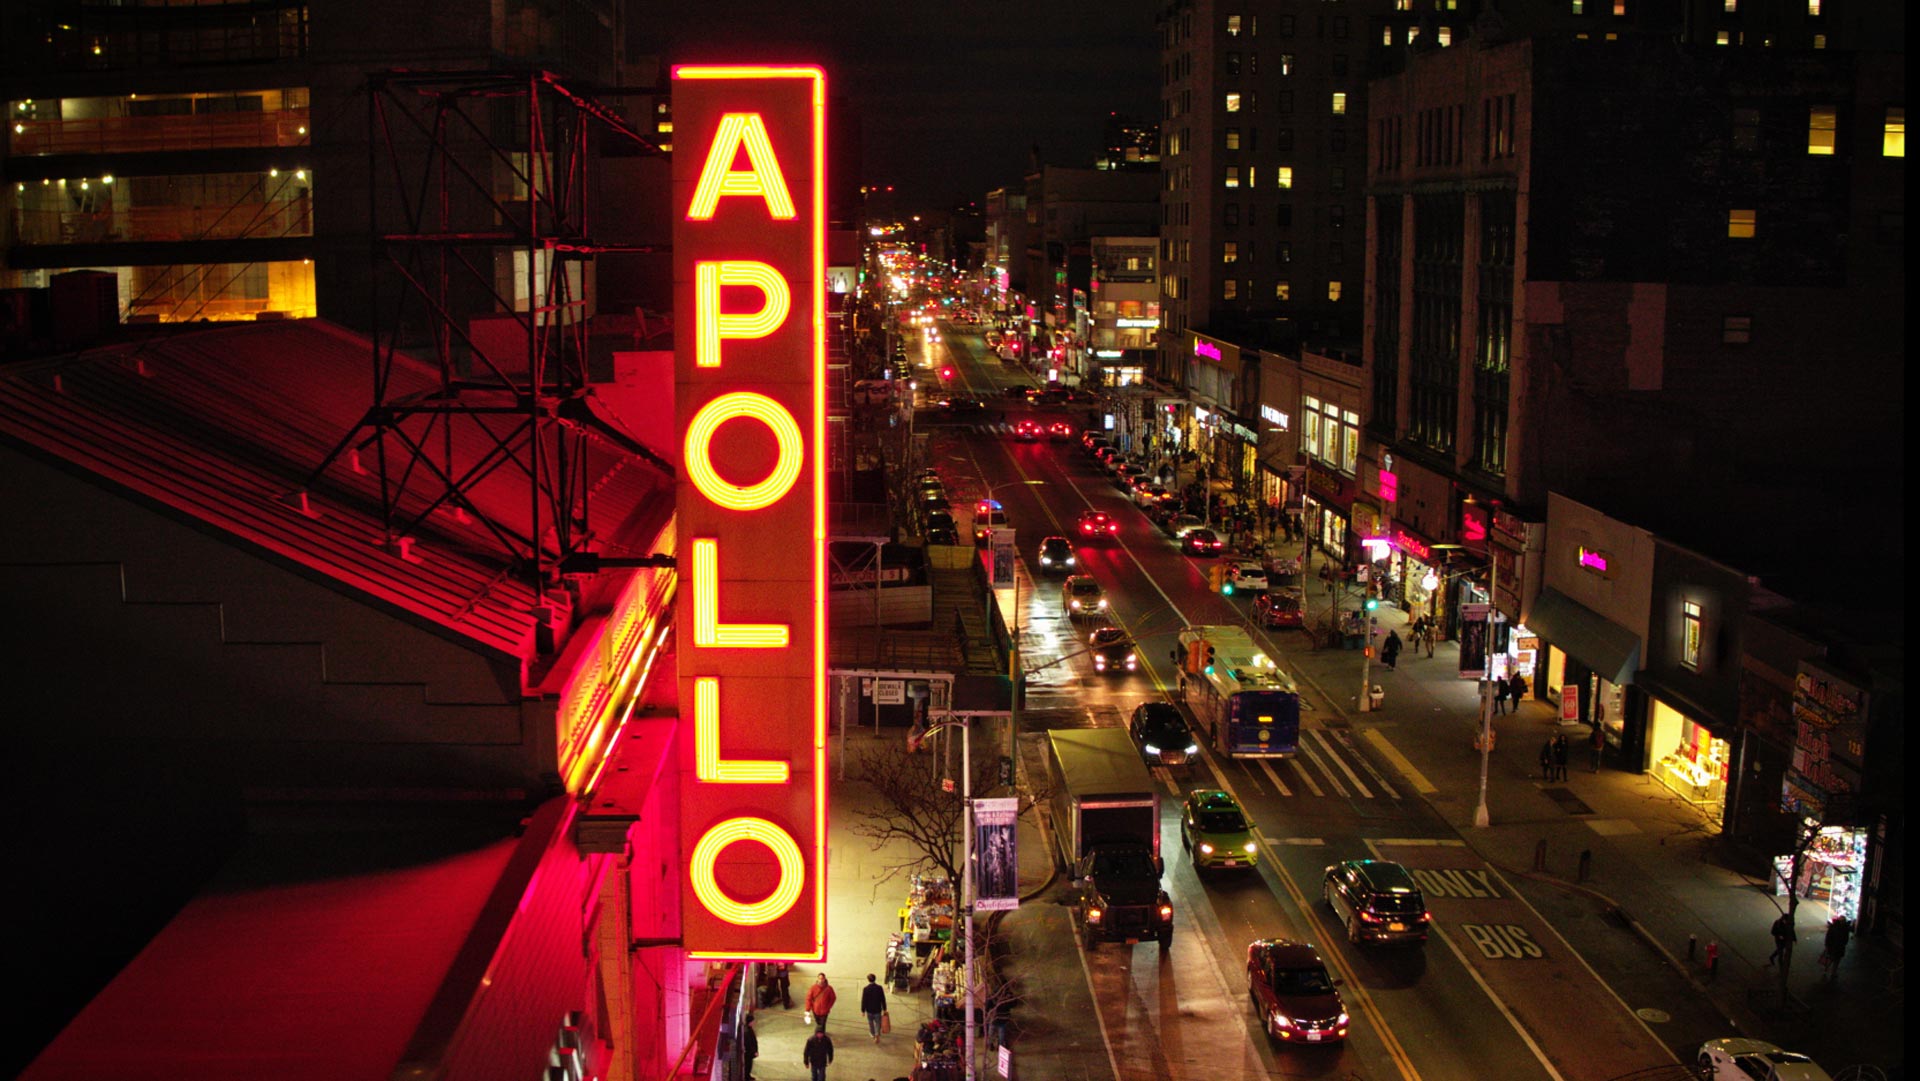 The Apollo Theater marquee, pictured in 'The Apollo,' Roger Ross Williams’ made-for-HBO study of the Harlem landmark of African American culture.